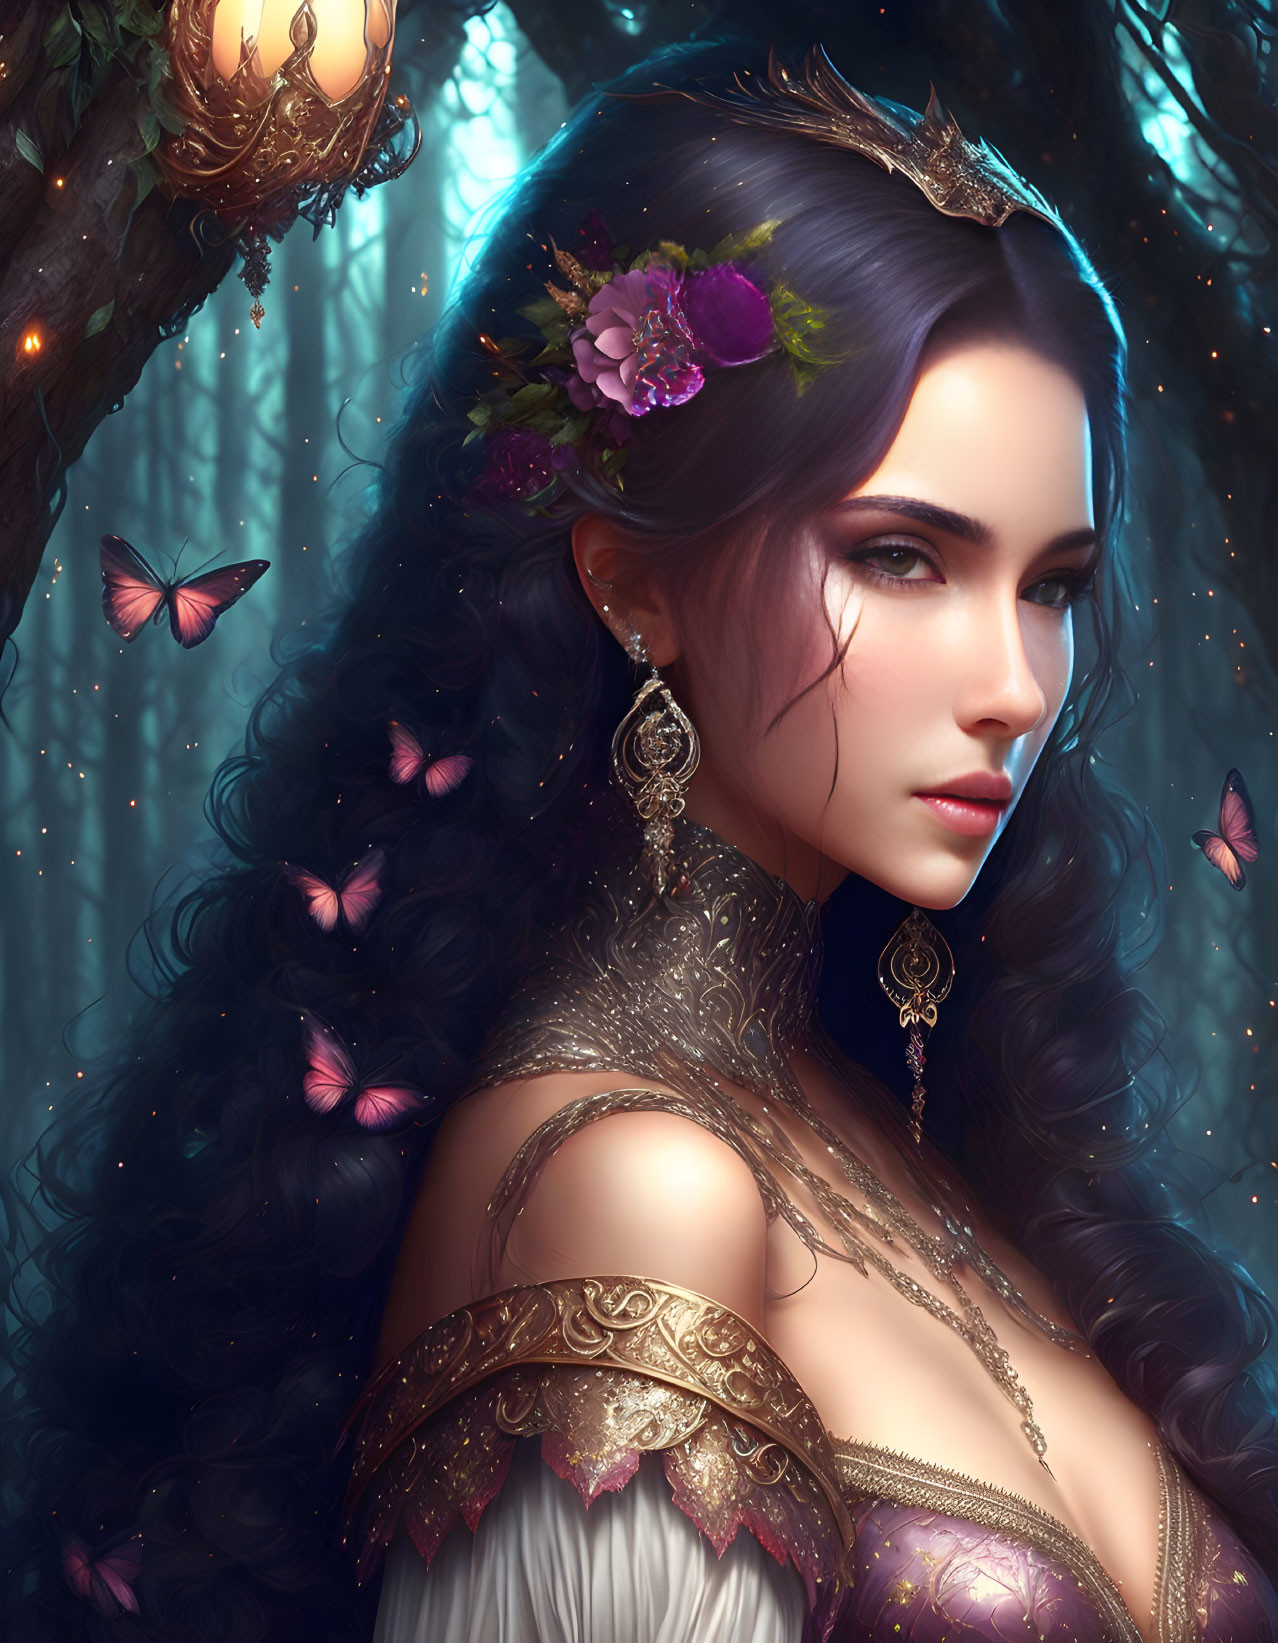 Digital artwork: Woman with black hair, flowers, butterflies, ornate jewelry, mystical forest background